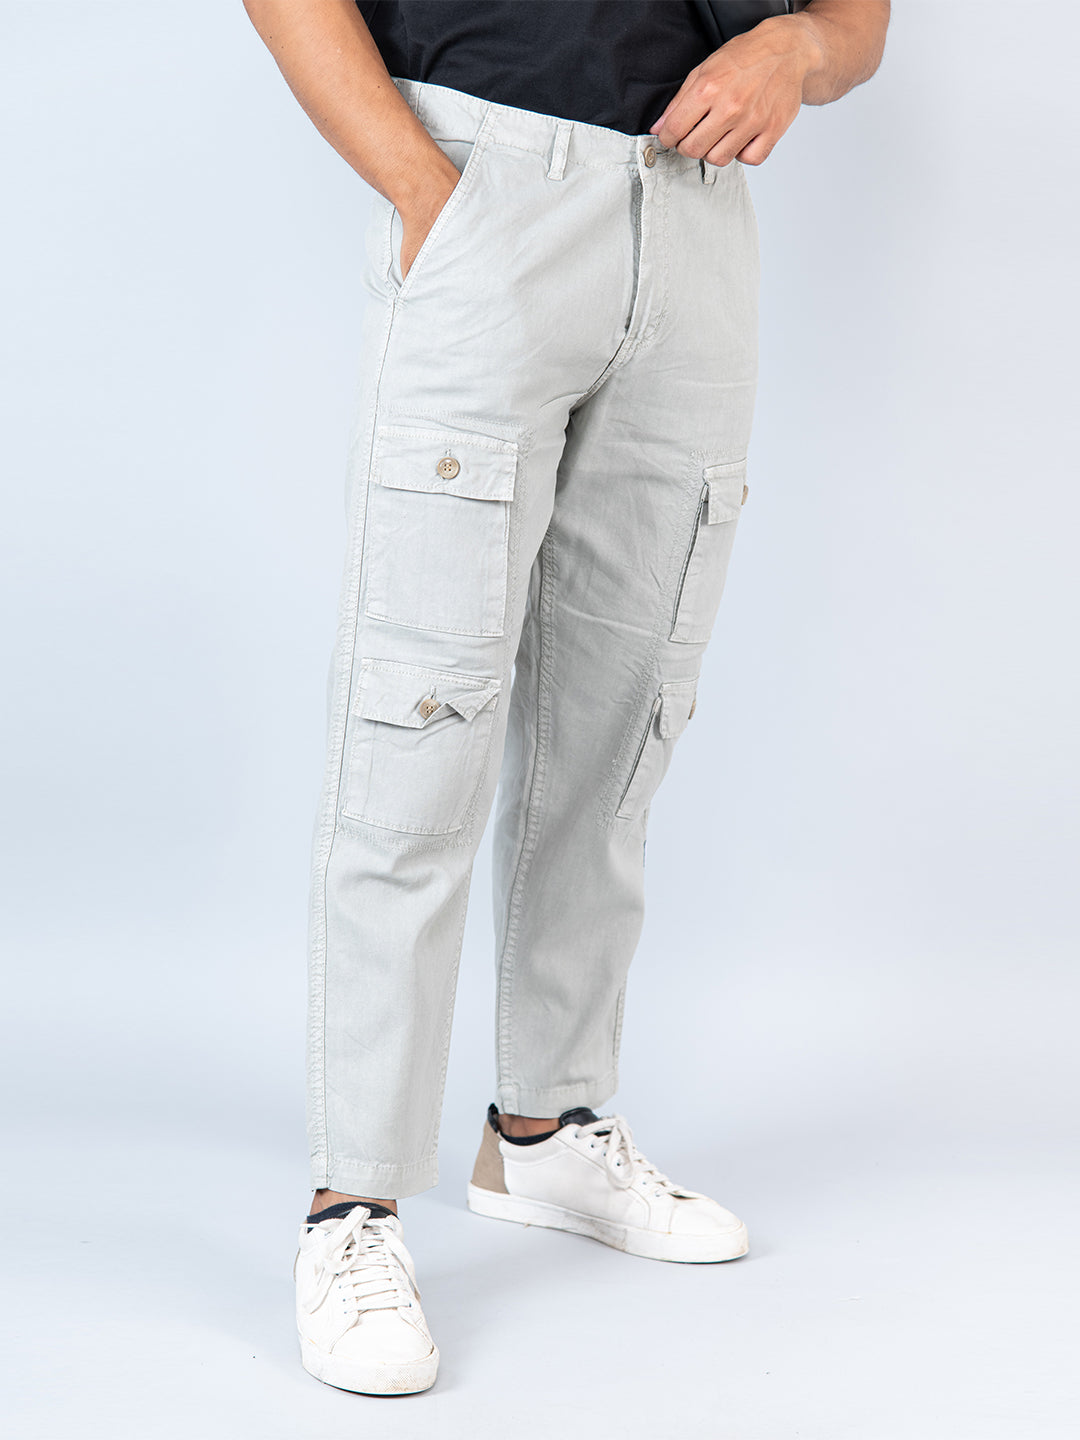 Buy PISTA GREEN Trousers & Pants for Men by Byford by Pantaloons Online |  Ajio.com